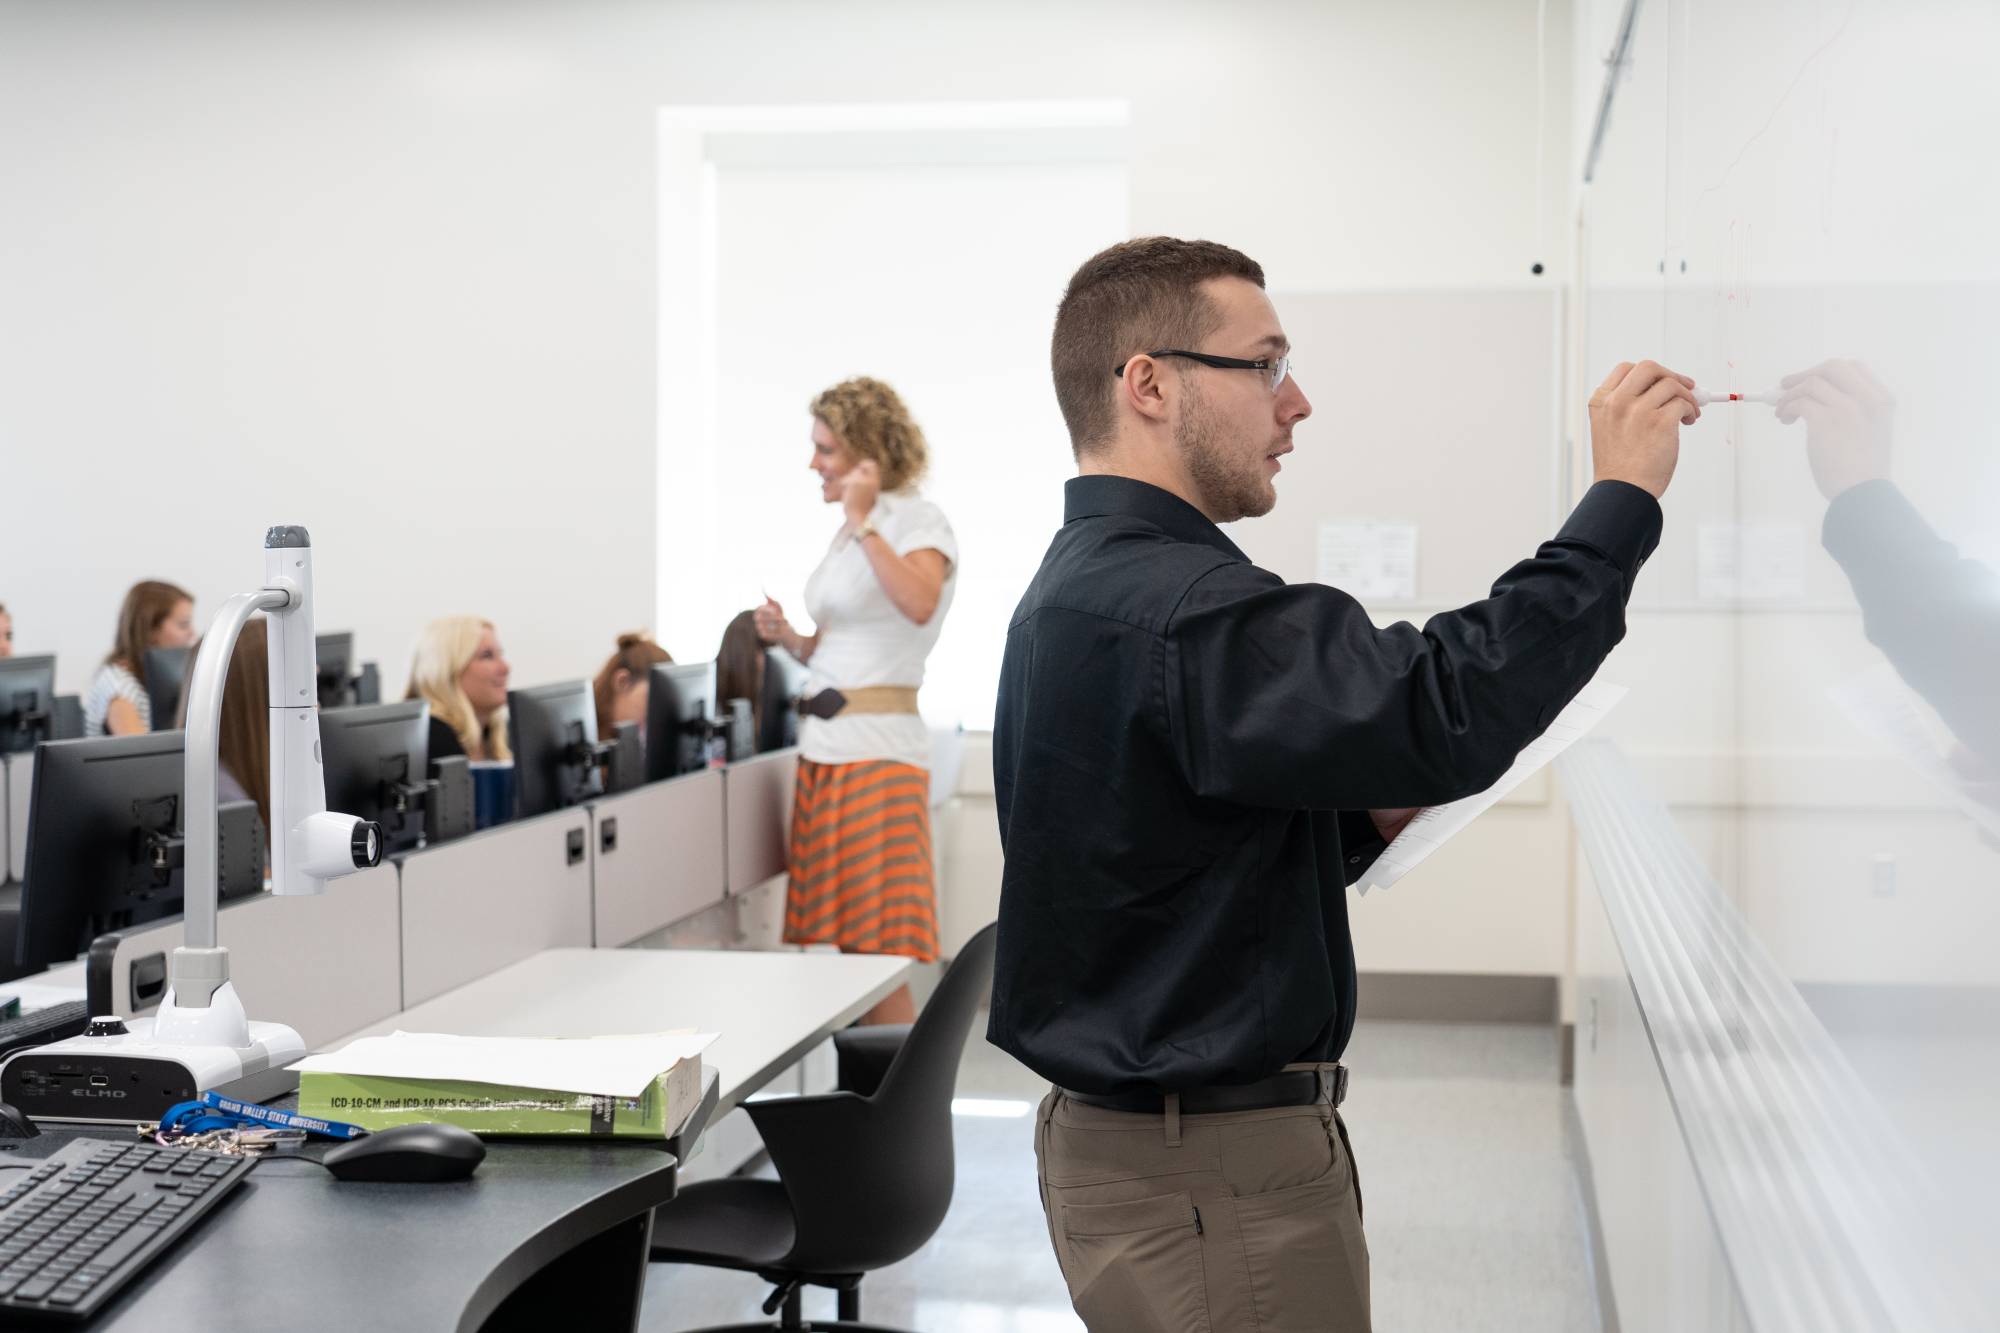 Instructor teaching up at the whiteboard of a classroom